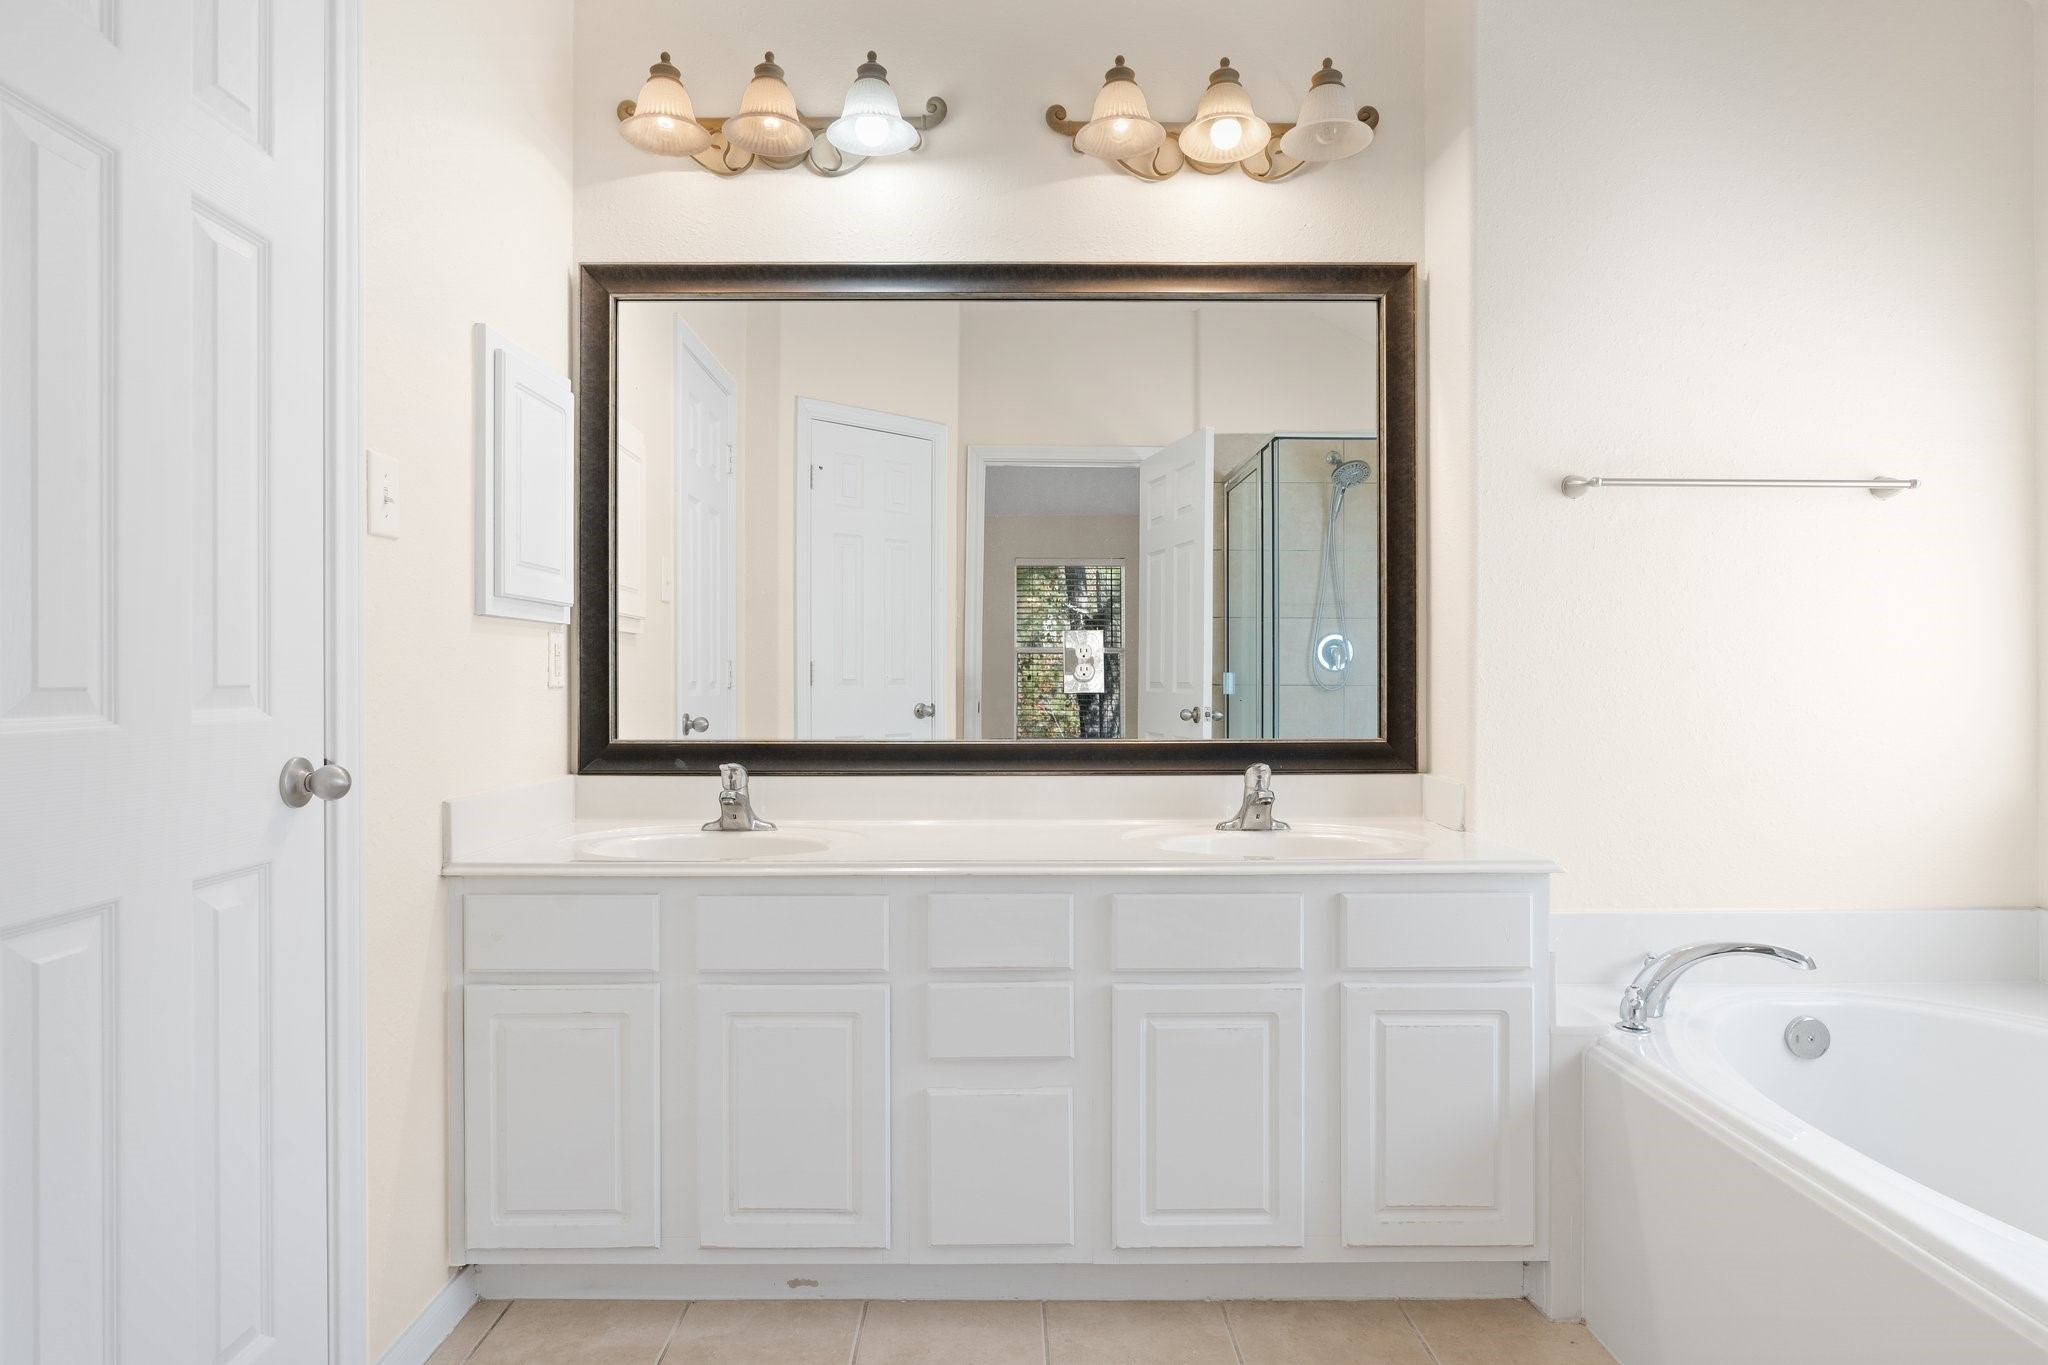 The primary bath offers a double vanity with a full size mirror!